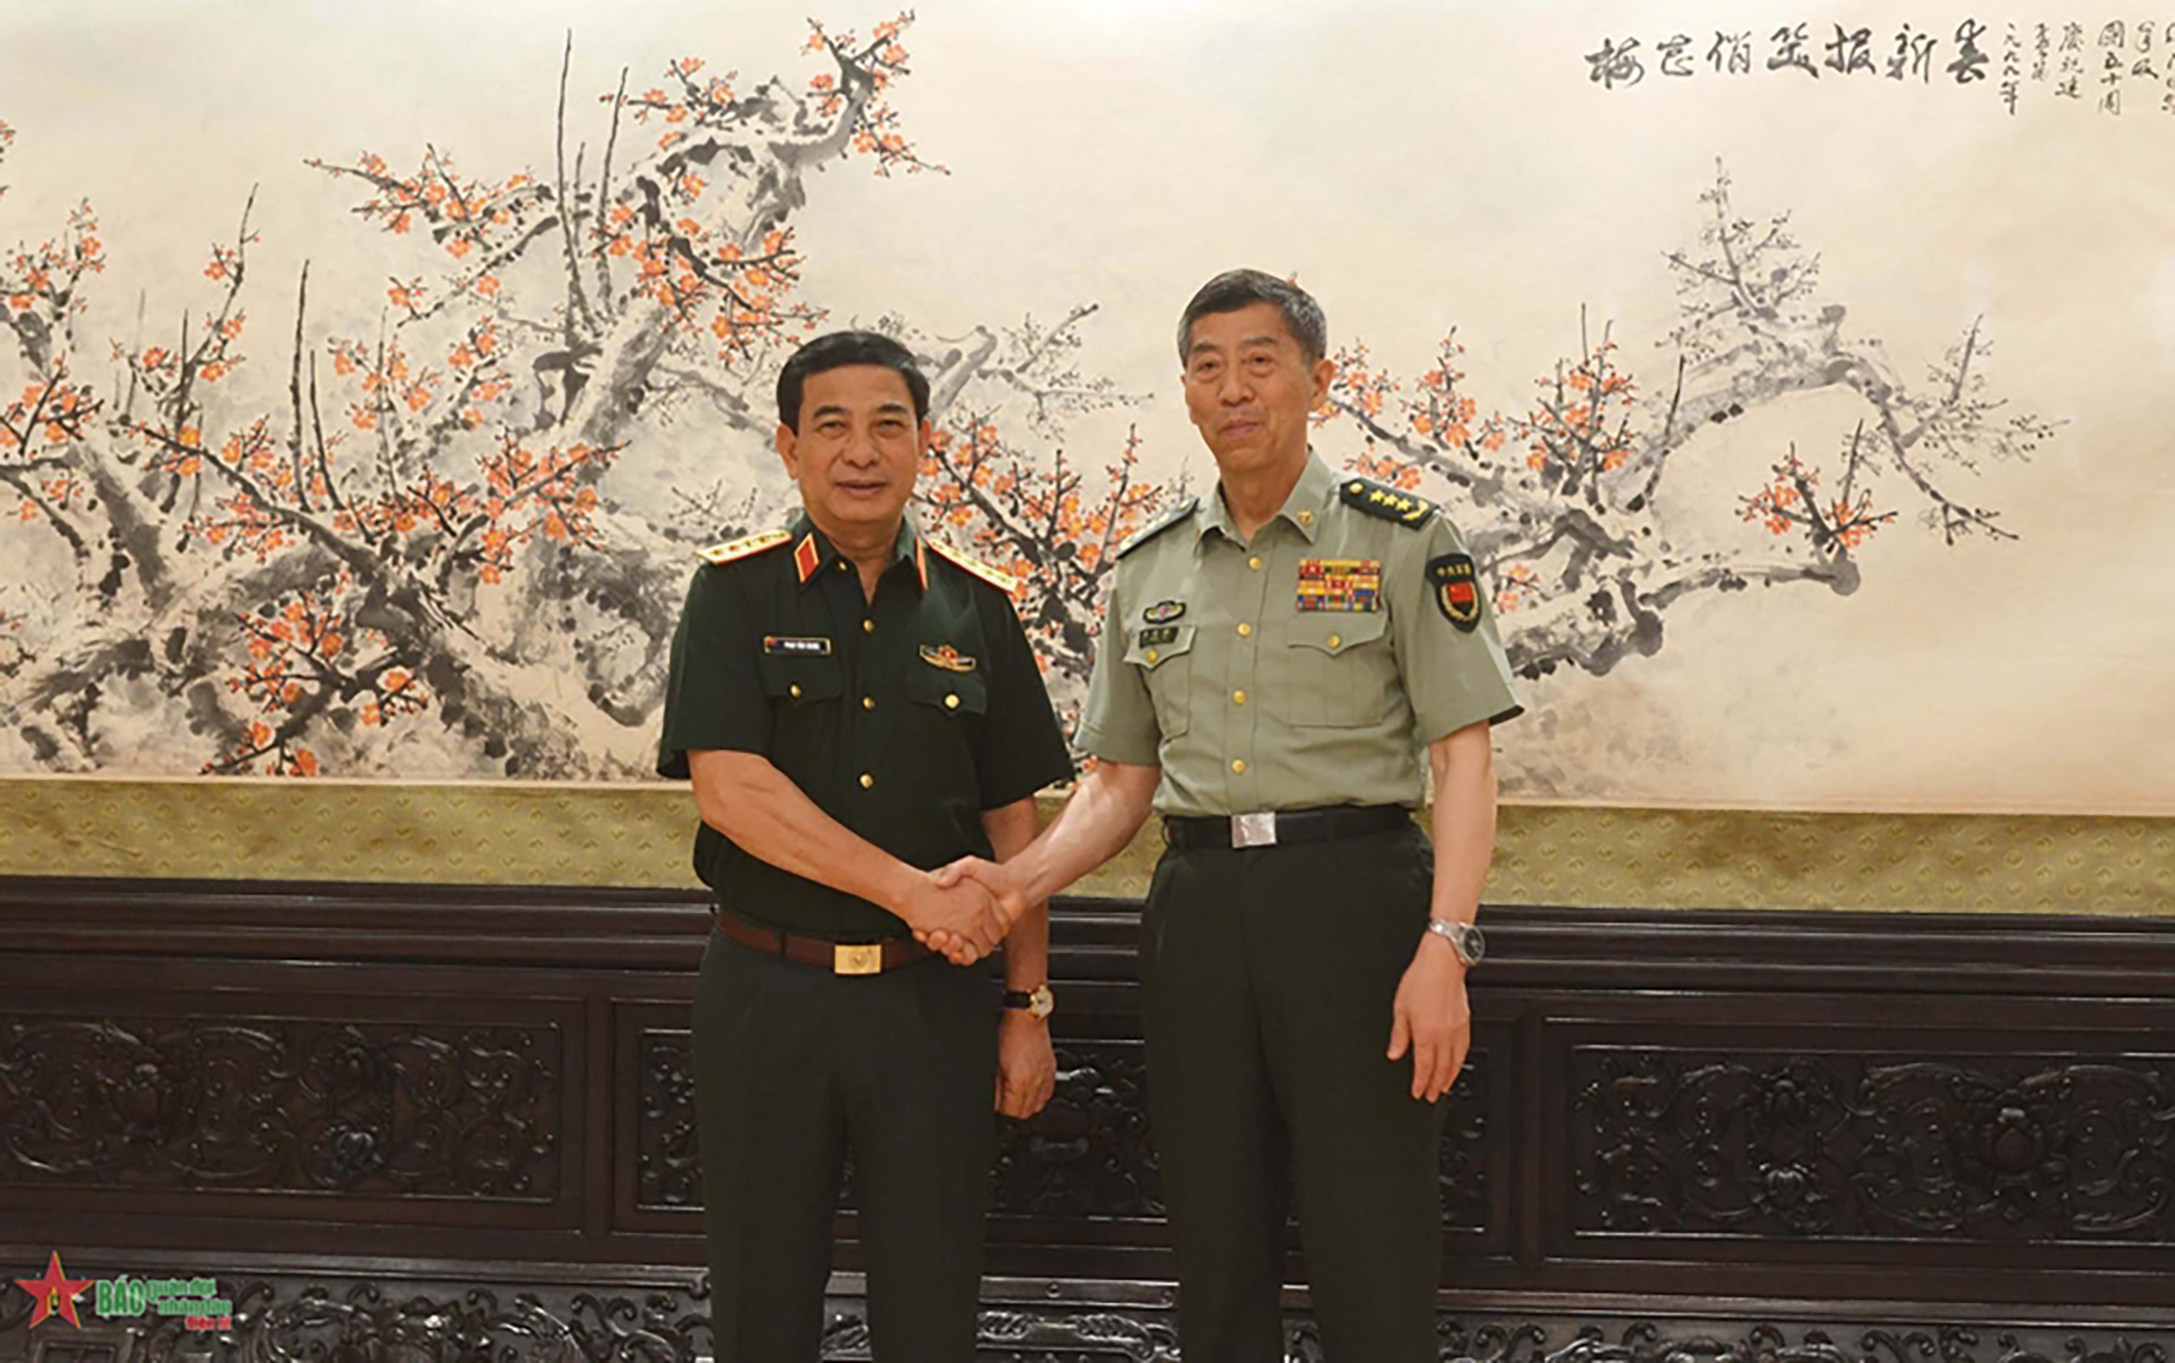 Cooperation was the theme as Chinese Defence Minister Li Shangfu met Vietnamese Defence Minister Phan Van Giang in Beijing on Tuesday. Photo: Vietnam People’s Army Newspaper